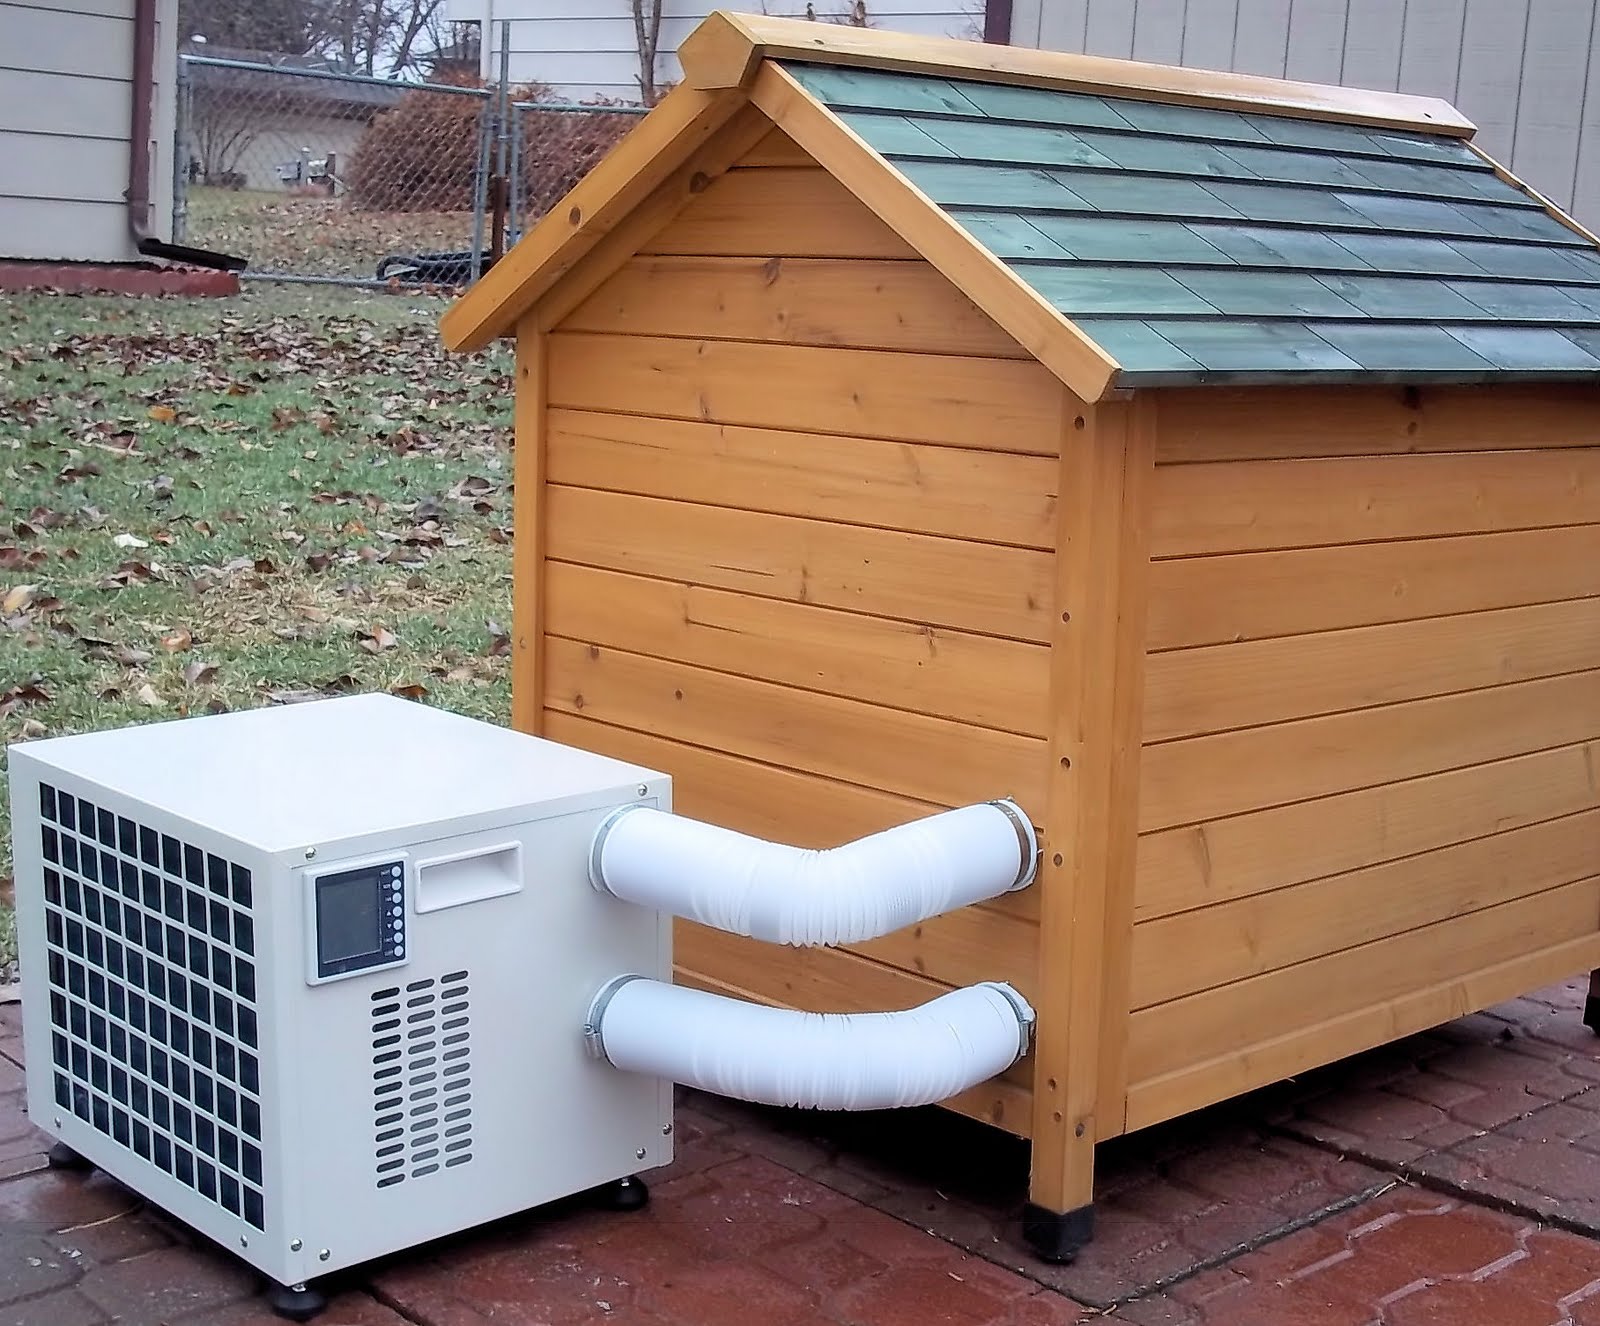 Heater For Dog House Outside | # Home Improvement